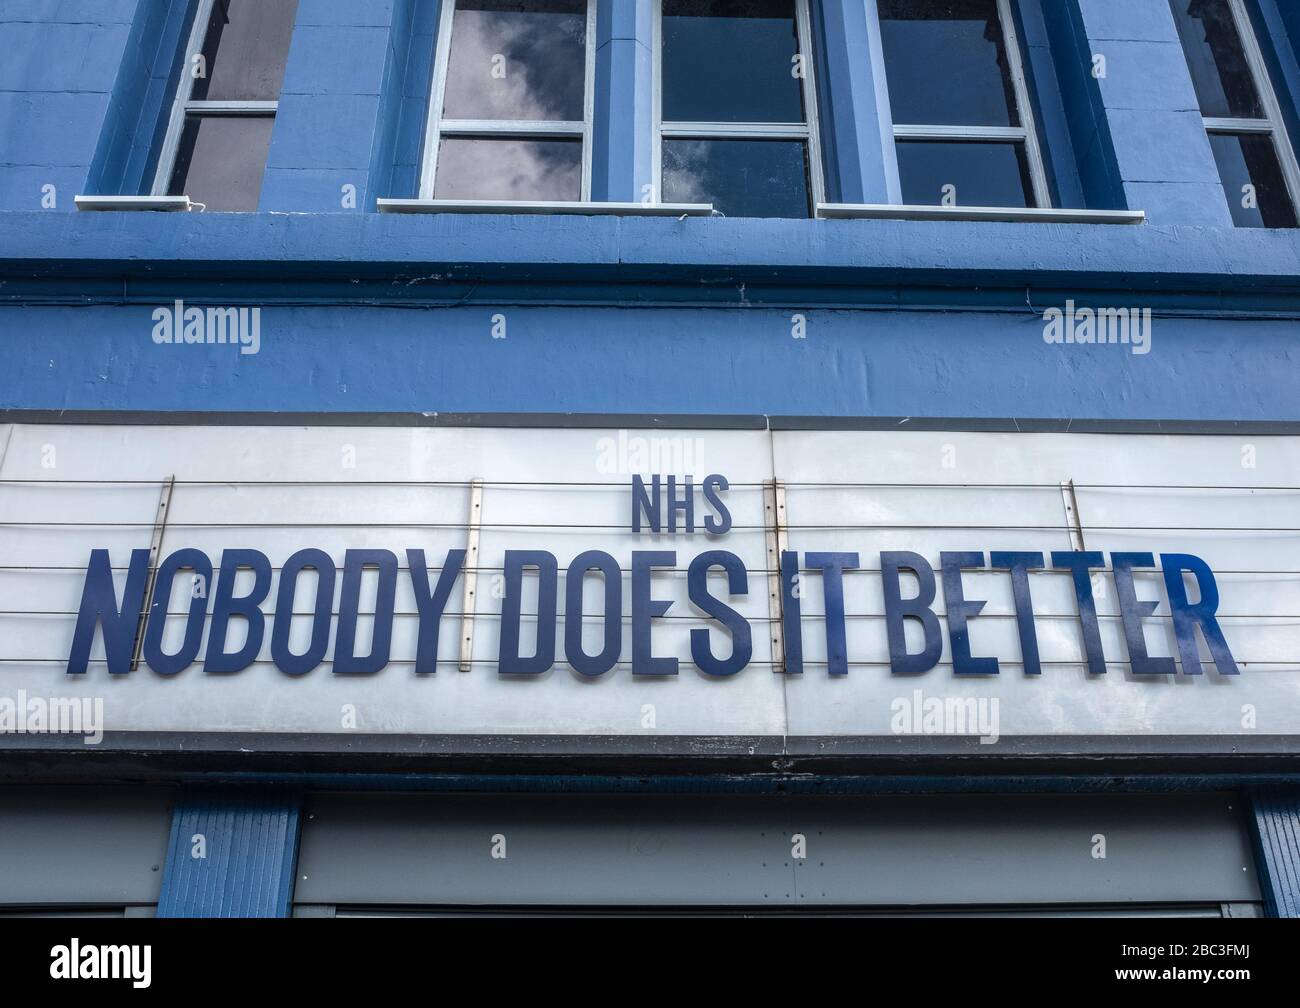 GLASGOW, UK – MAR 28 2020 - A Tribute To The British National Health Service (NHS) On A Theatre Marquee During The Coronavirus Pandemic Stock Photo